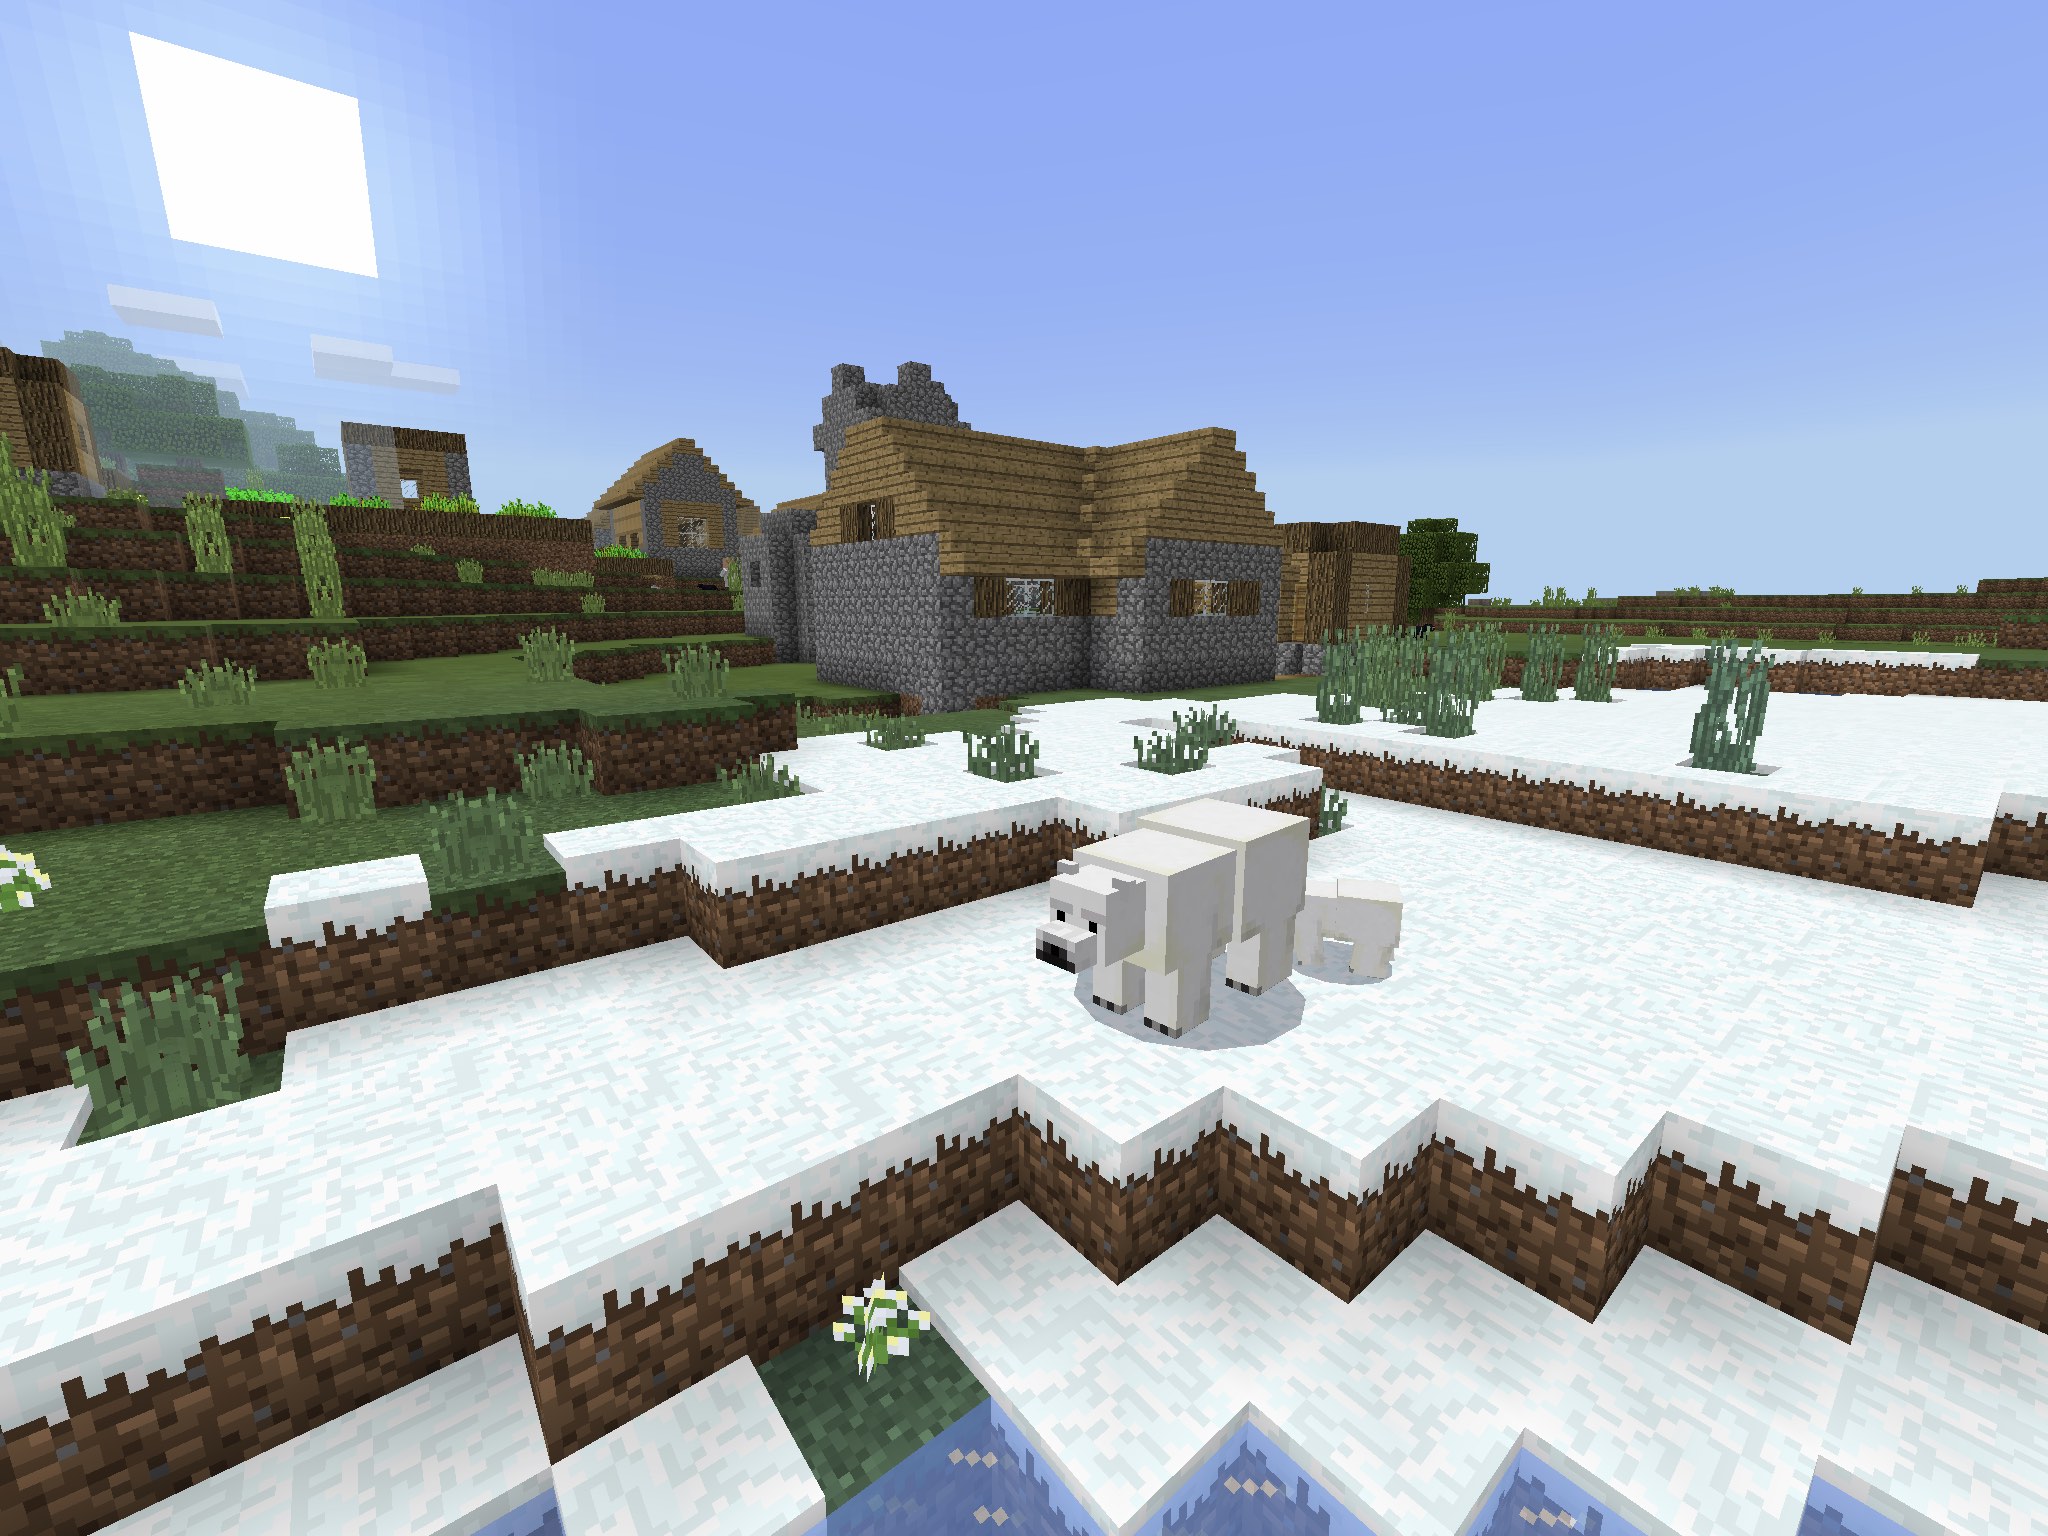 Free download Minecraft PE Snow SeedsBedrock Edition Snow Seeds [2048x1536] for your Desktop, Mobile & Tablet. Explore Minecraft Village Christmas Wallpaper. Minecraft Village Christmas Wallpaper, Christmas Village Background, Christmas